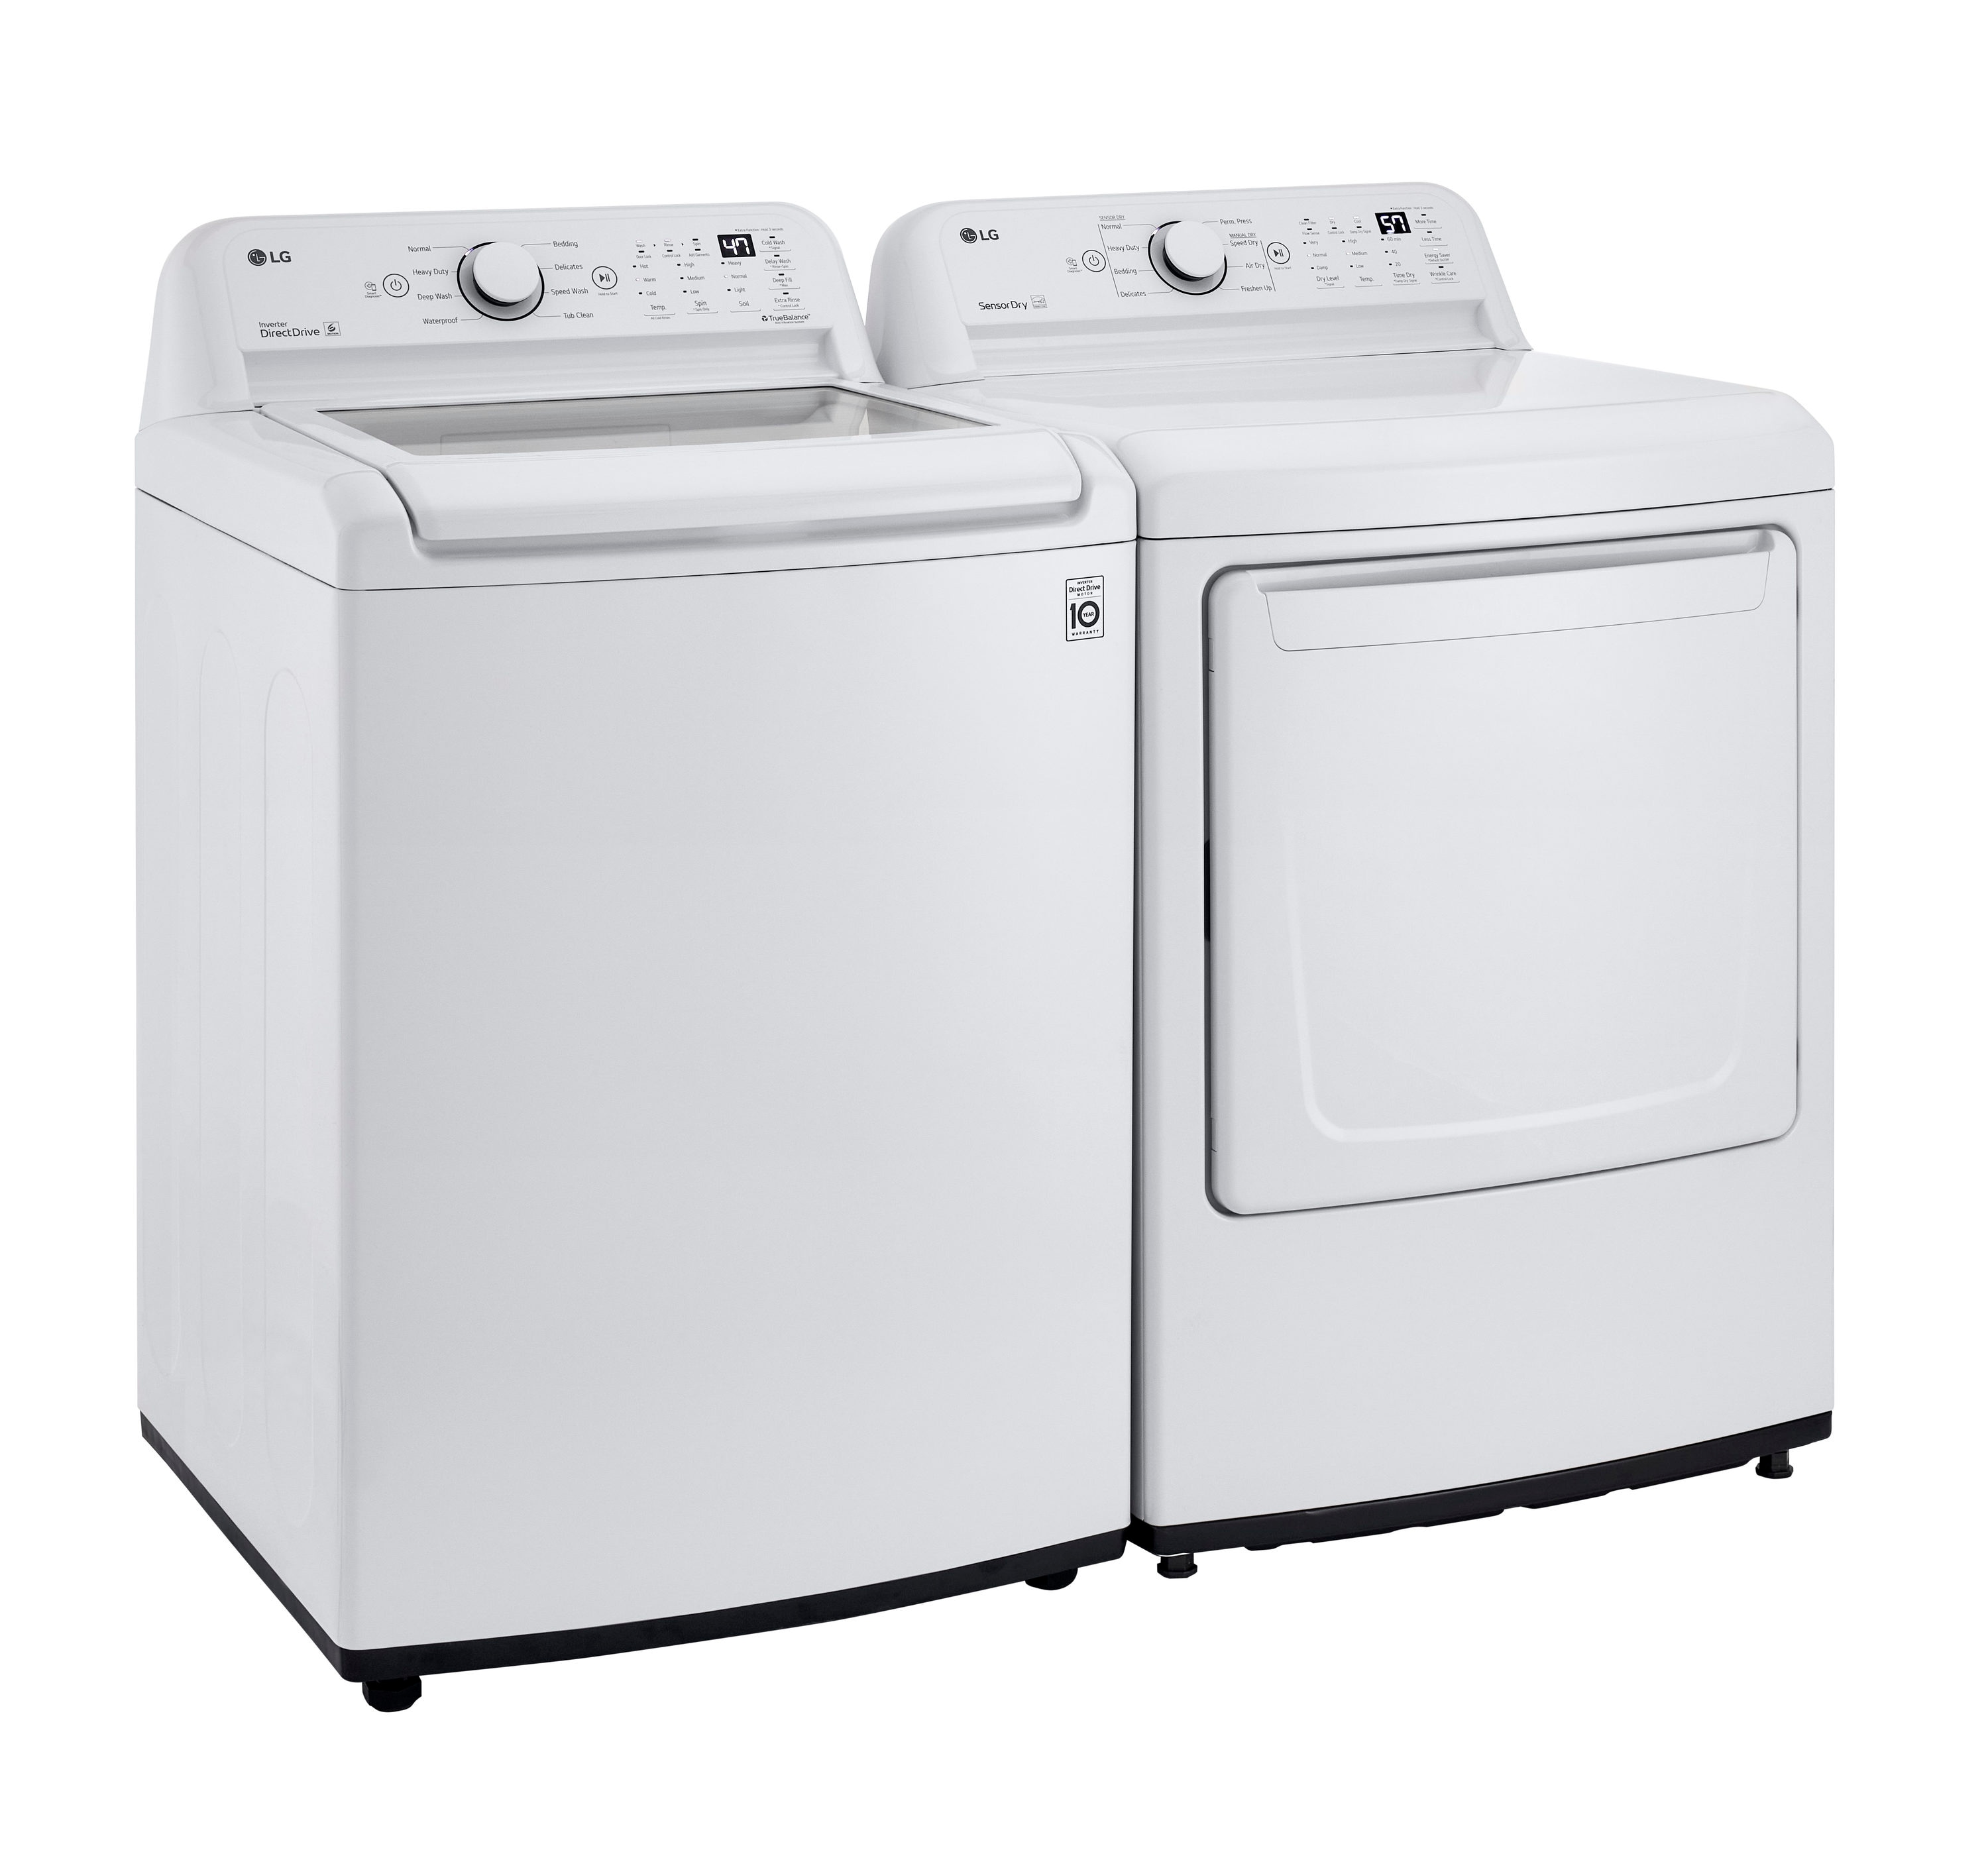 LG 4.3-cu ft High Efficiency Impeller Top-Load Washer (White) ENERGY STAR  at